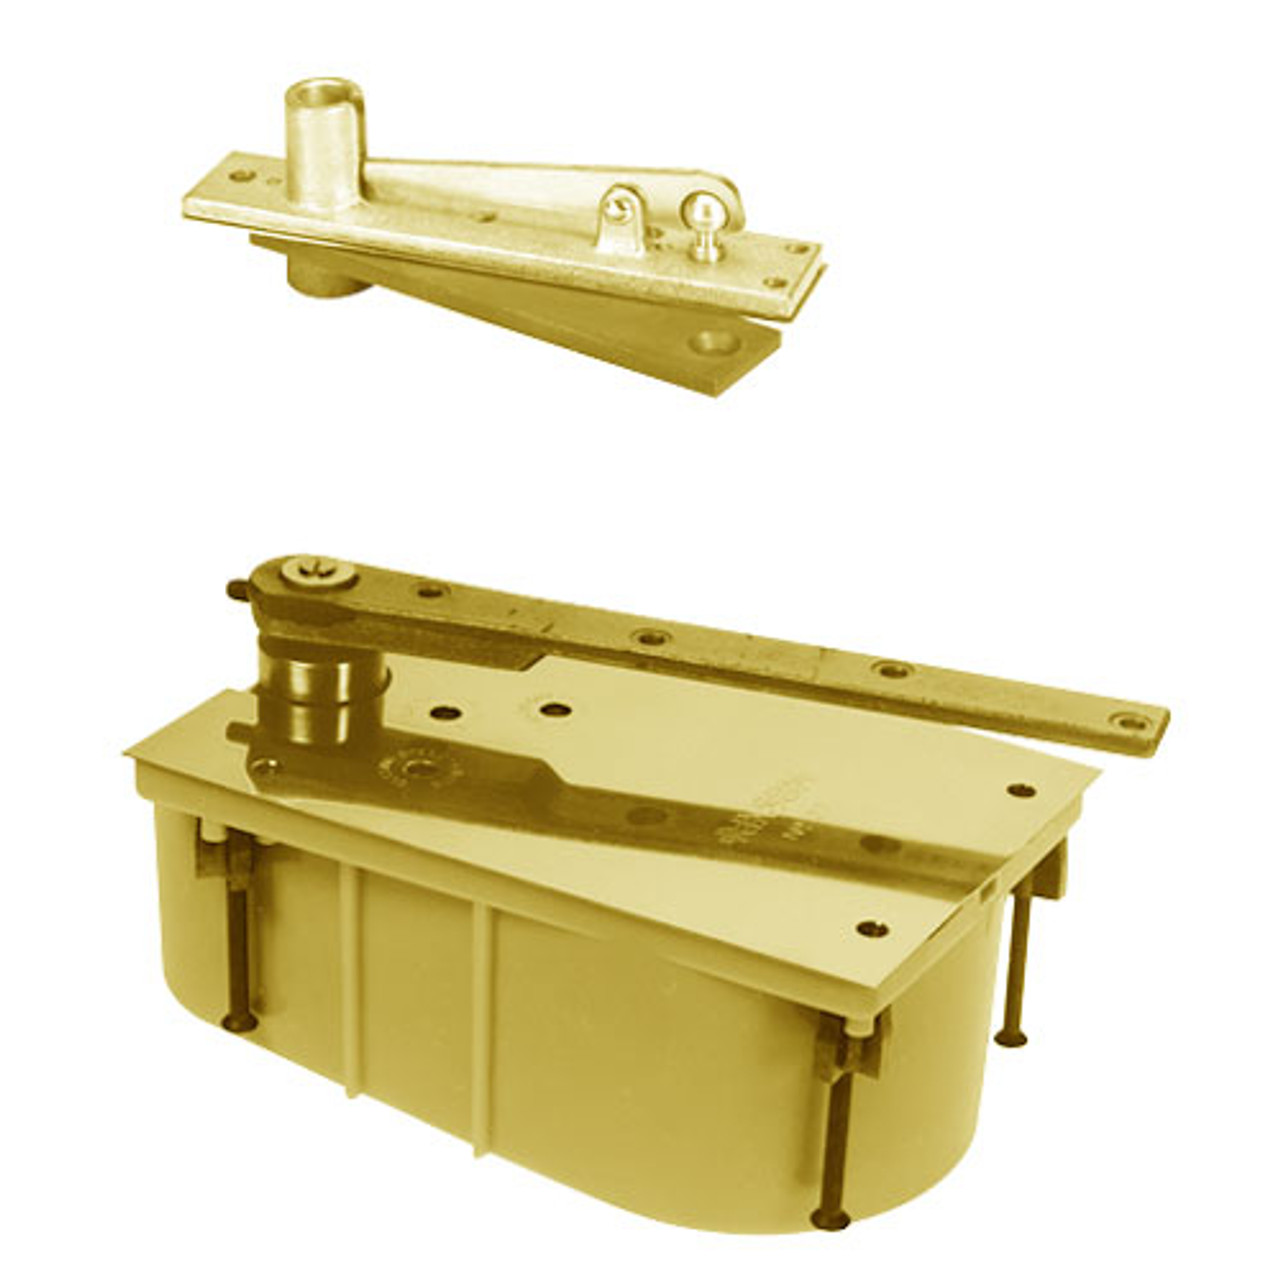 PH28-105S-554-CWF-RH-605 Rixson 28 Series Heavy Duty Single Acting Center Hung Floor Closer with Concealed Arm in Bright Brass Finish